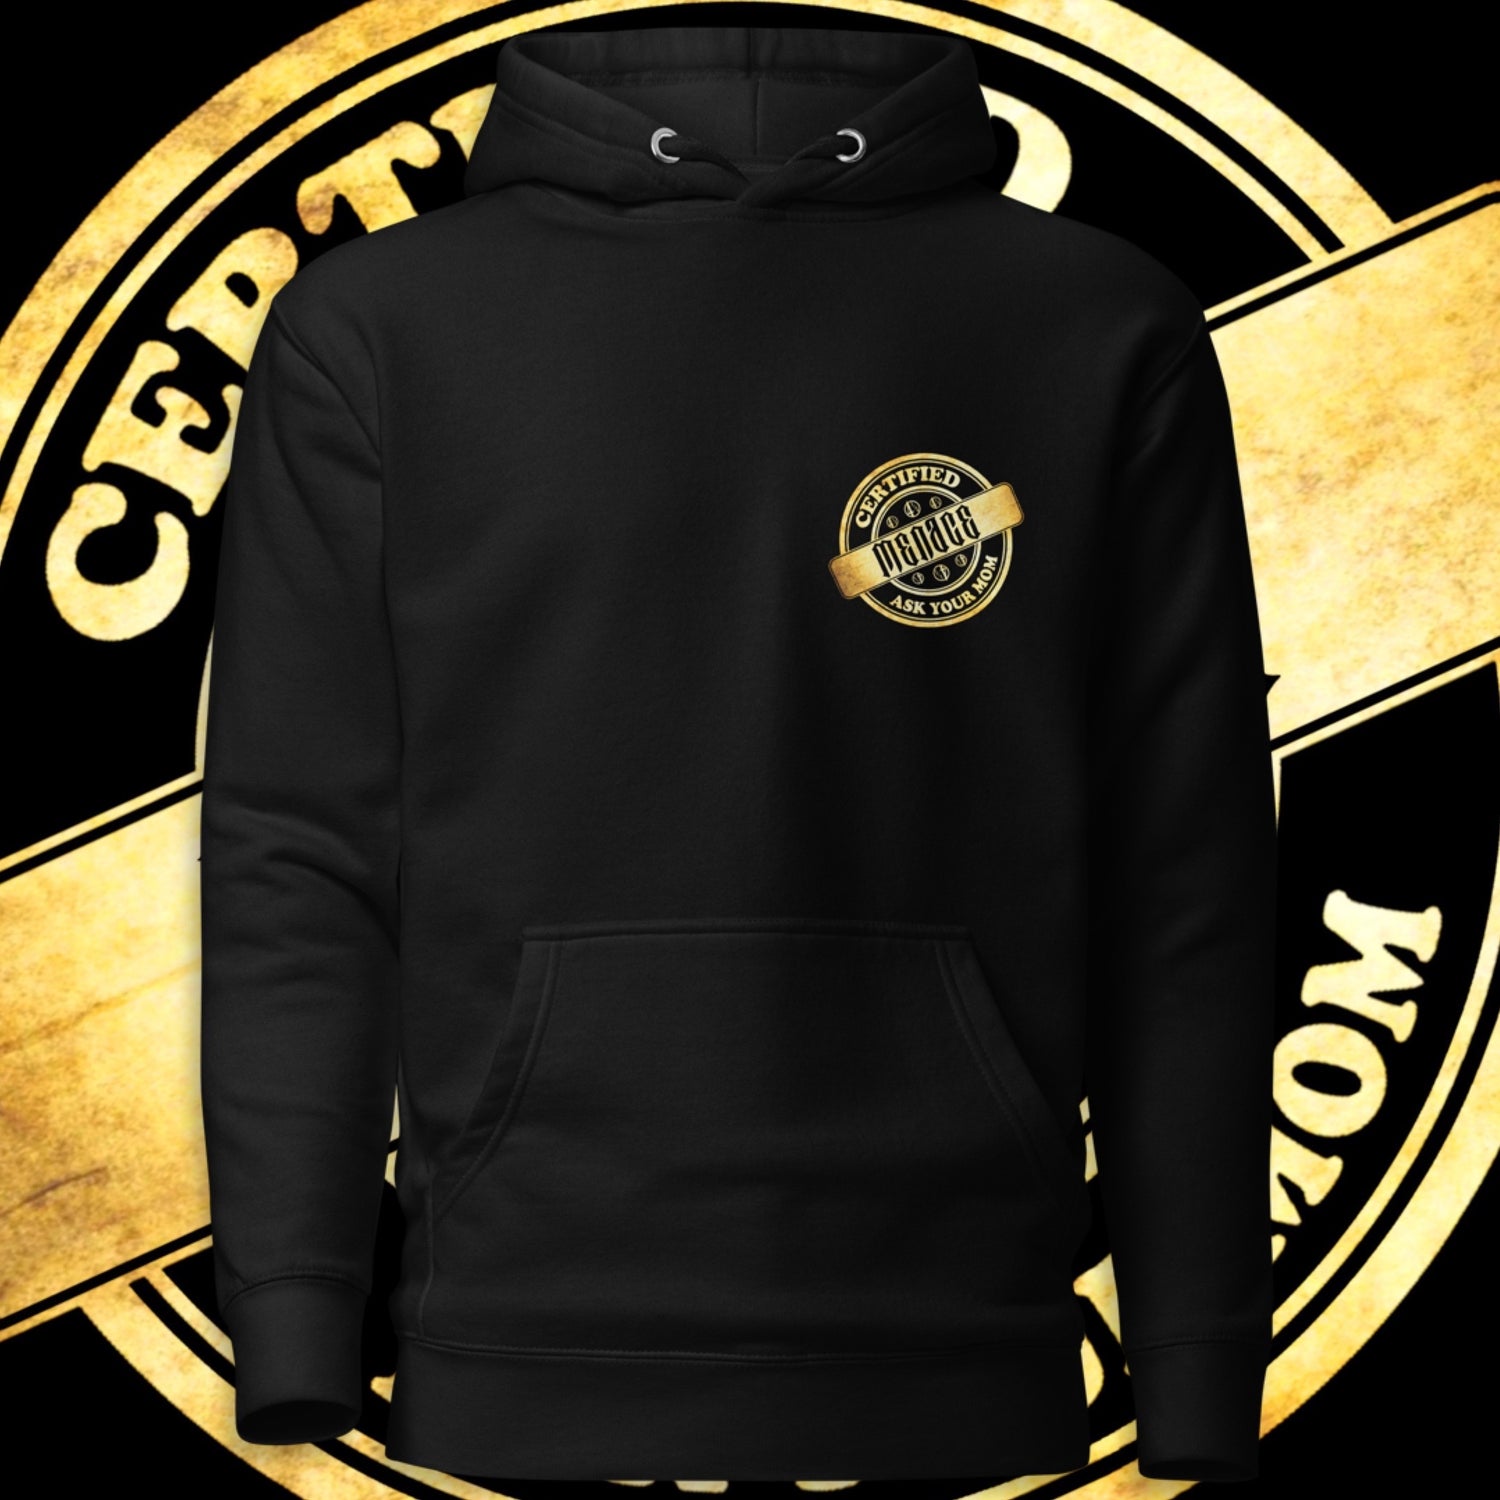 Menace Clothing Co - Certified Menace hoodie. Black hoodie with Certified Menace graphic on front let side of hoodie, golden certified logo saying Certified, Menace, Ask Your Mom.